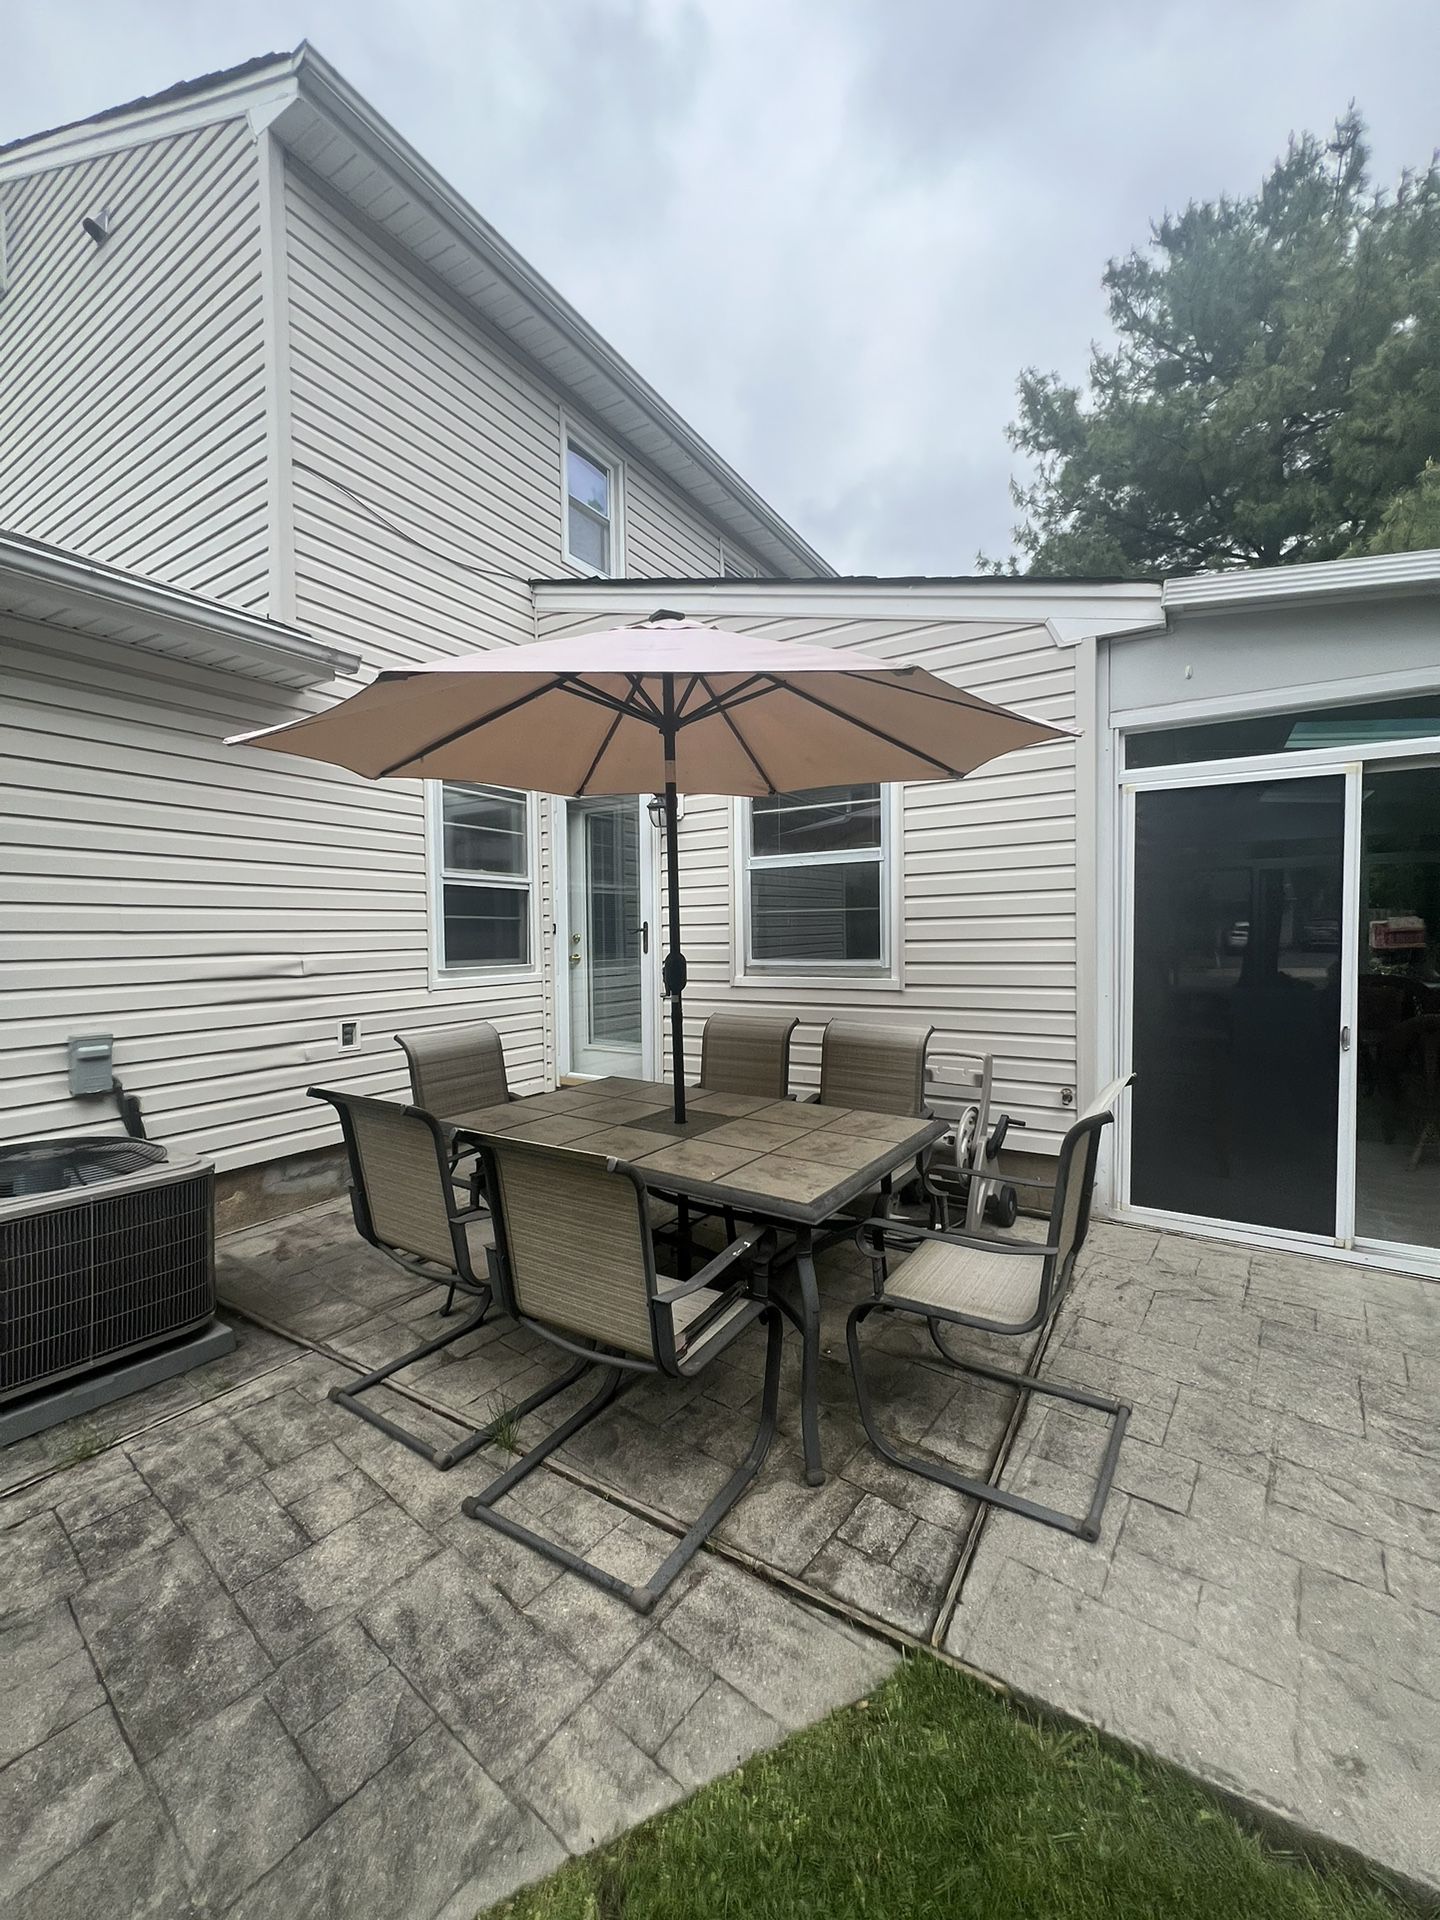 Patio Furniture With 6 Chairs And Umbrella